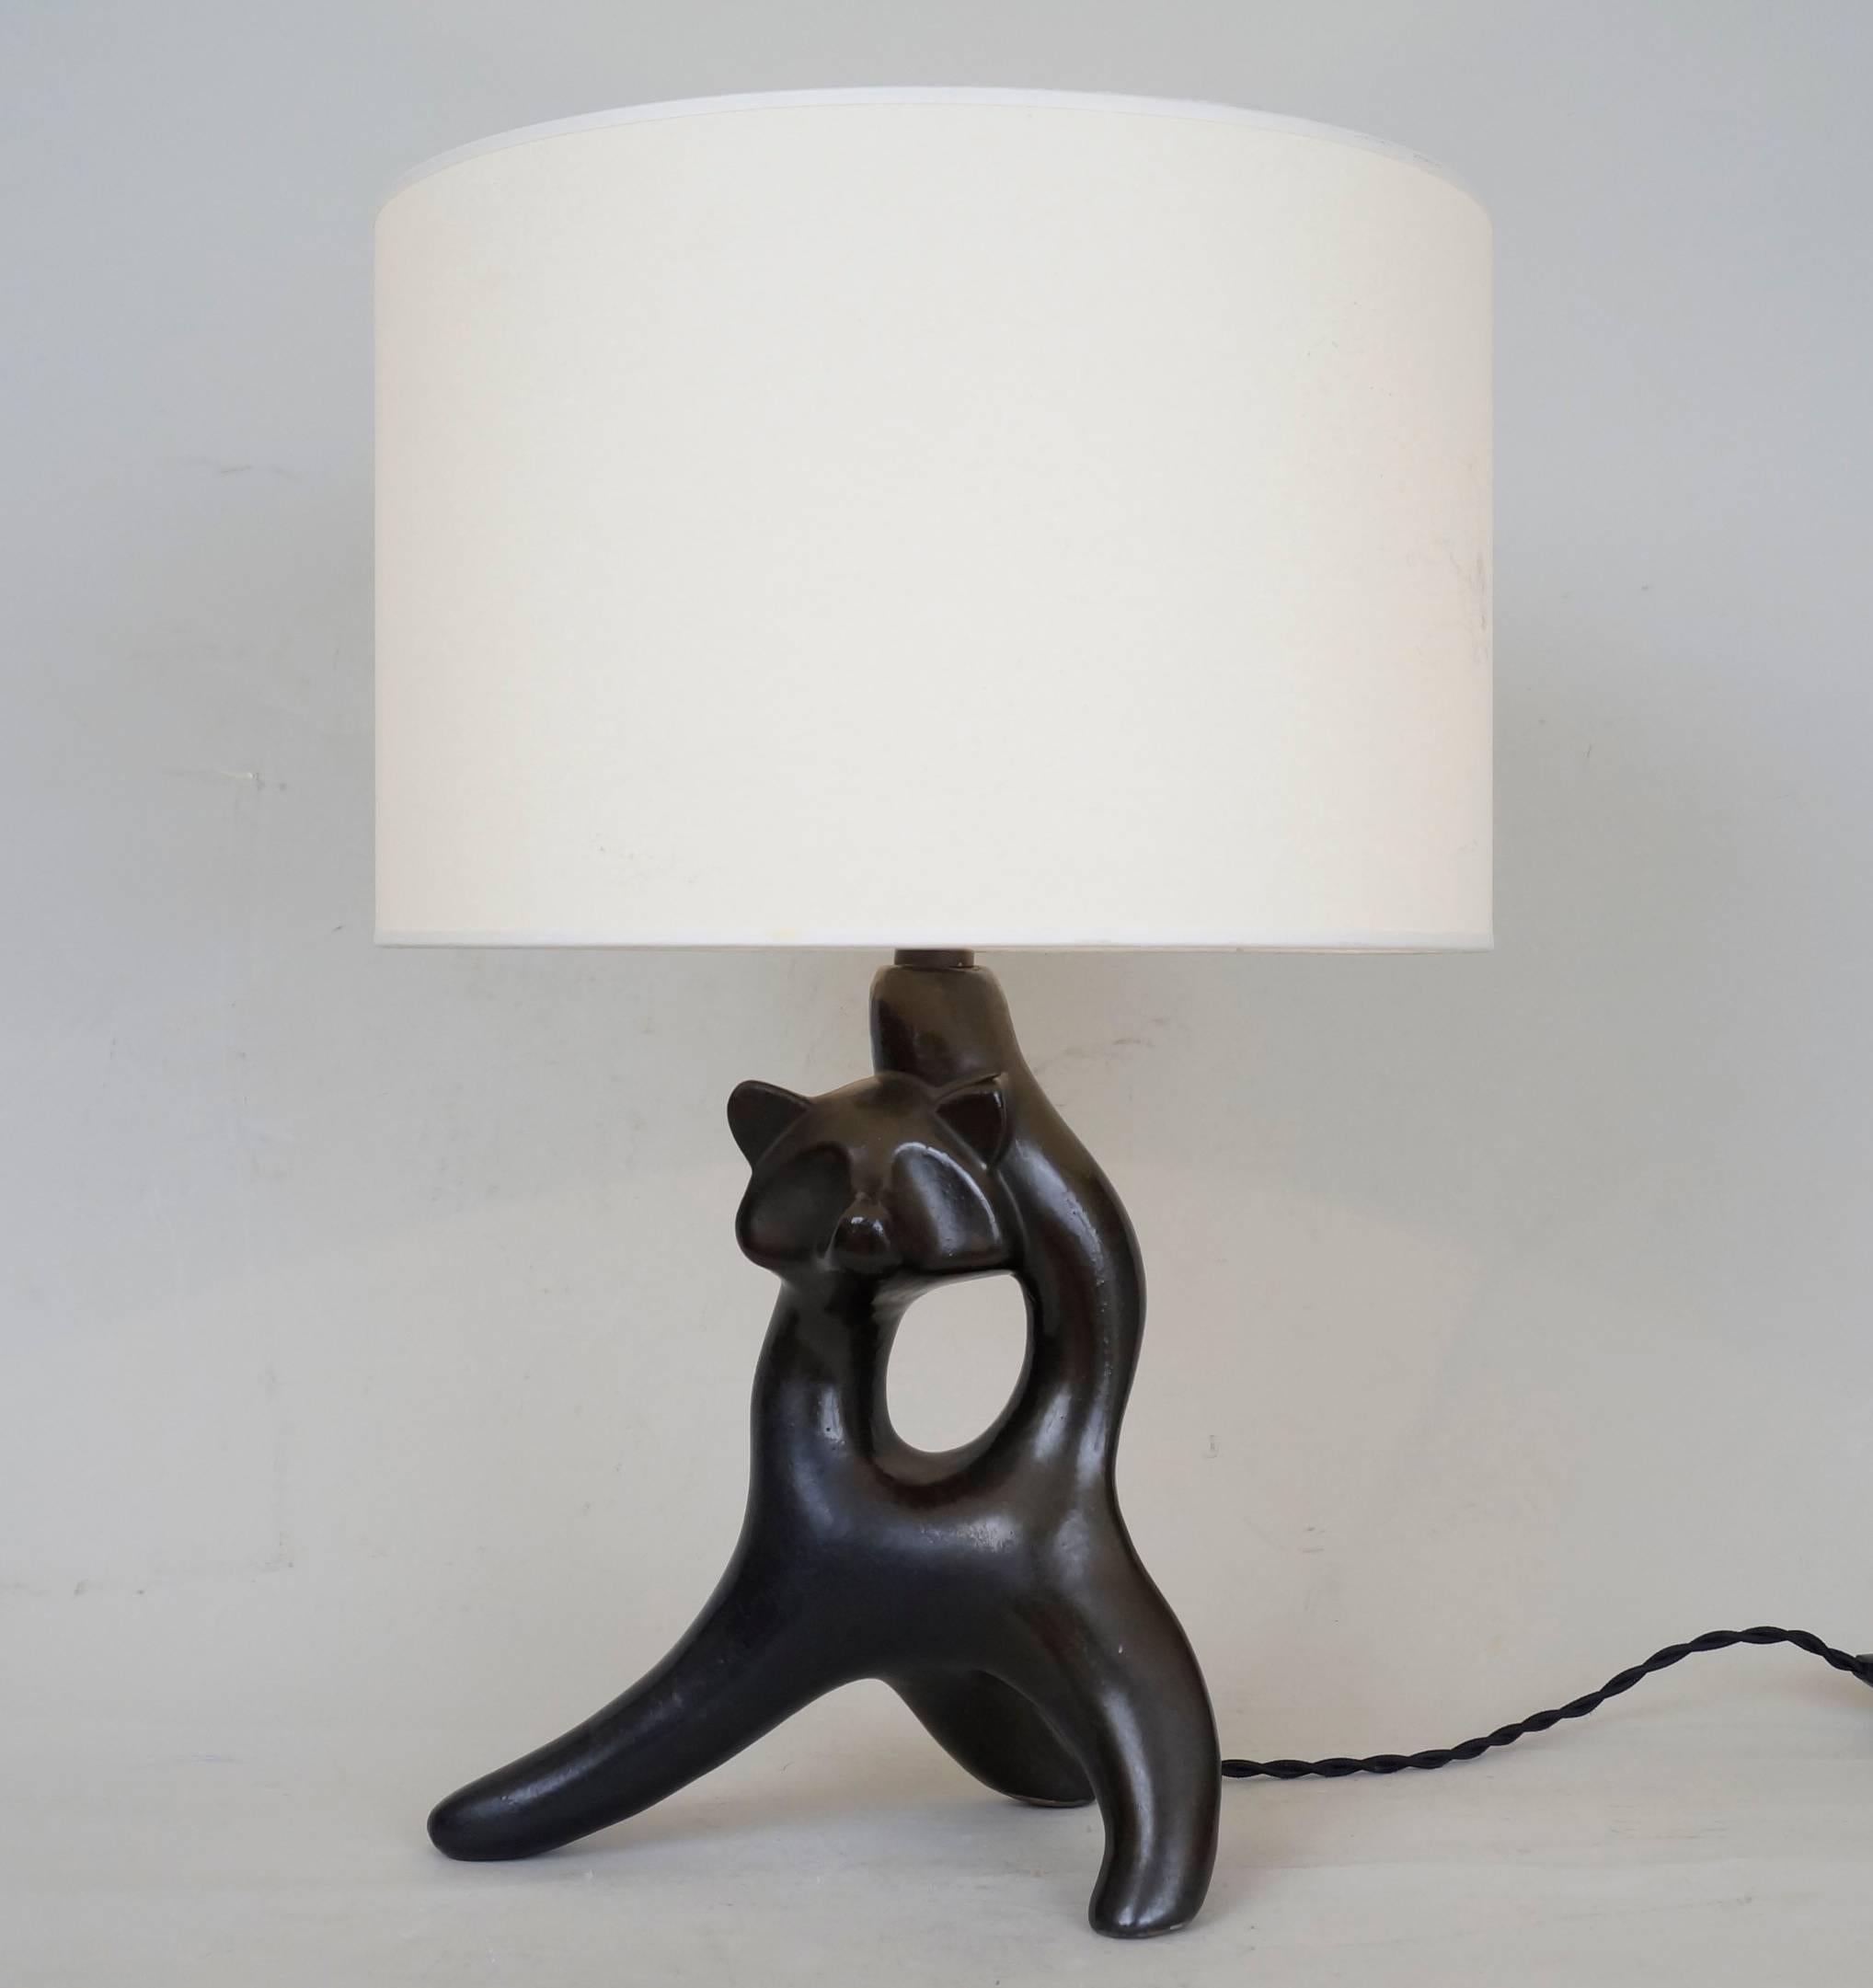 Bear shape black ceramic table lamps.
Custom-made fabric lampshades.
Rewired with twisted silk cord.
US standard plug on request.
Measures: Ceramic body height 23 cm-9,1 in.
Height with lampshade 42 cm-16,5 in.